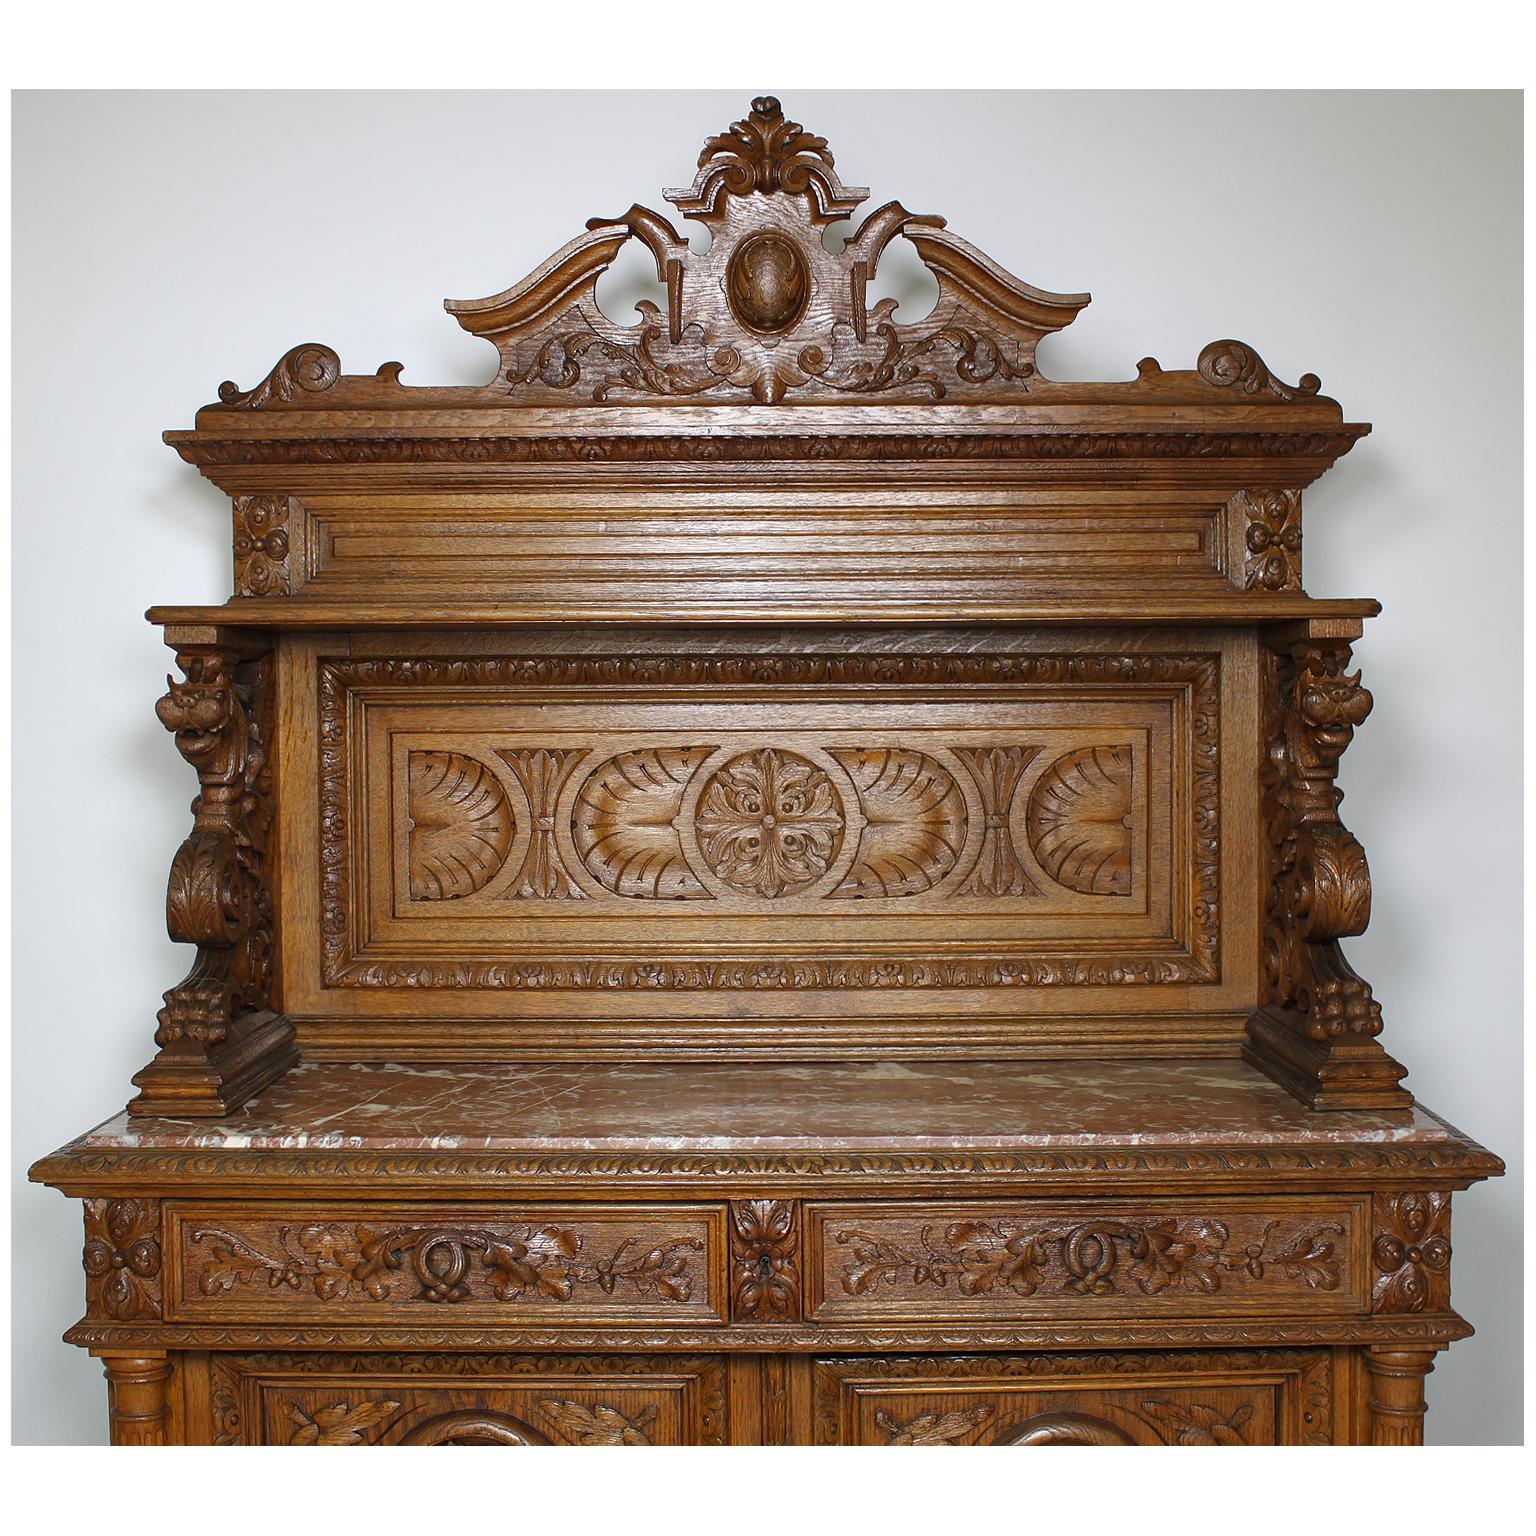 Renaissance Revival Italian 19th Century Baroque Style Oak-Carved Figural Server Cabinet Buffet For Sale